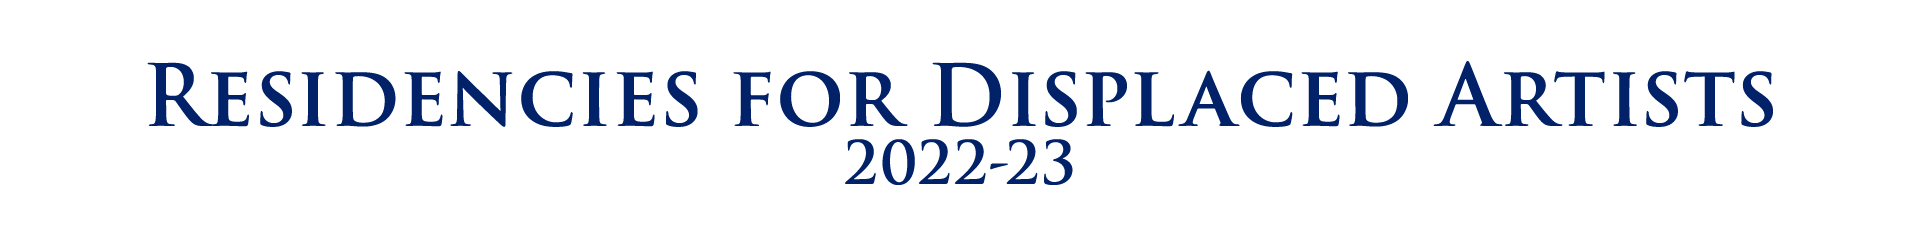 Residency for Displaced Artists 2022-23